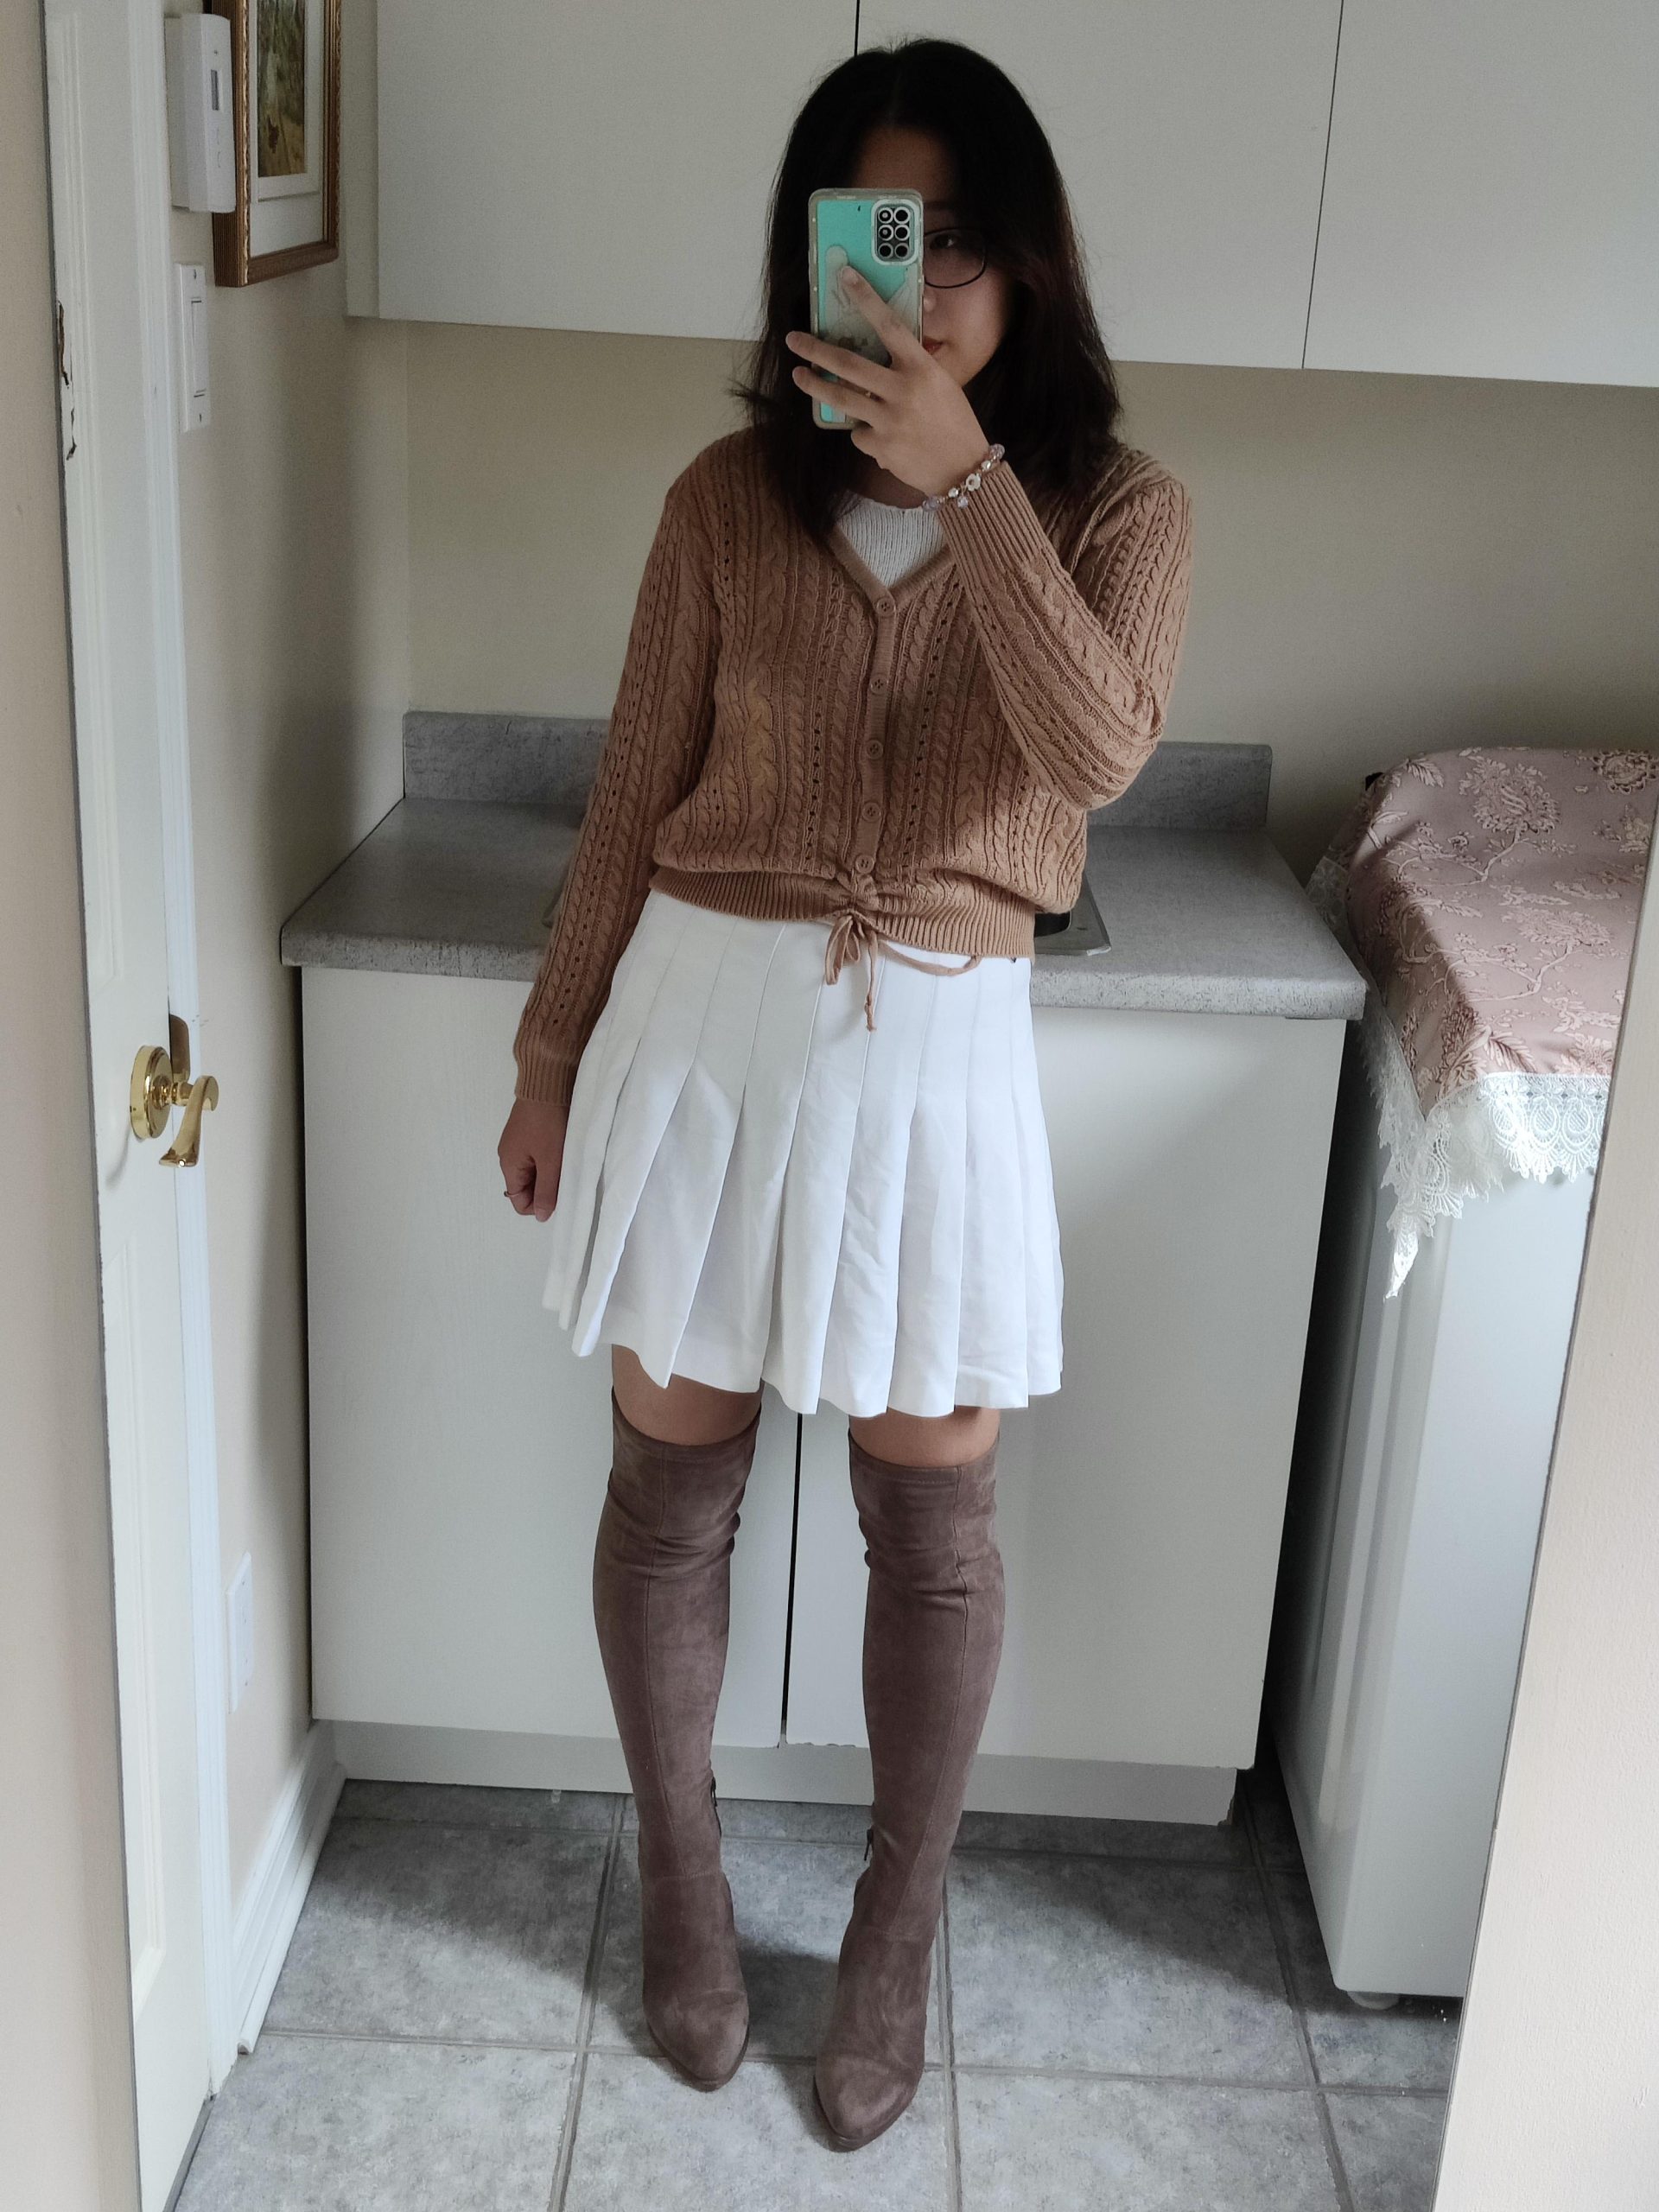 Skirts with boots for Every Season插图4